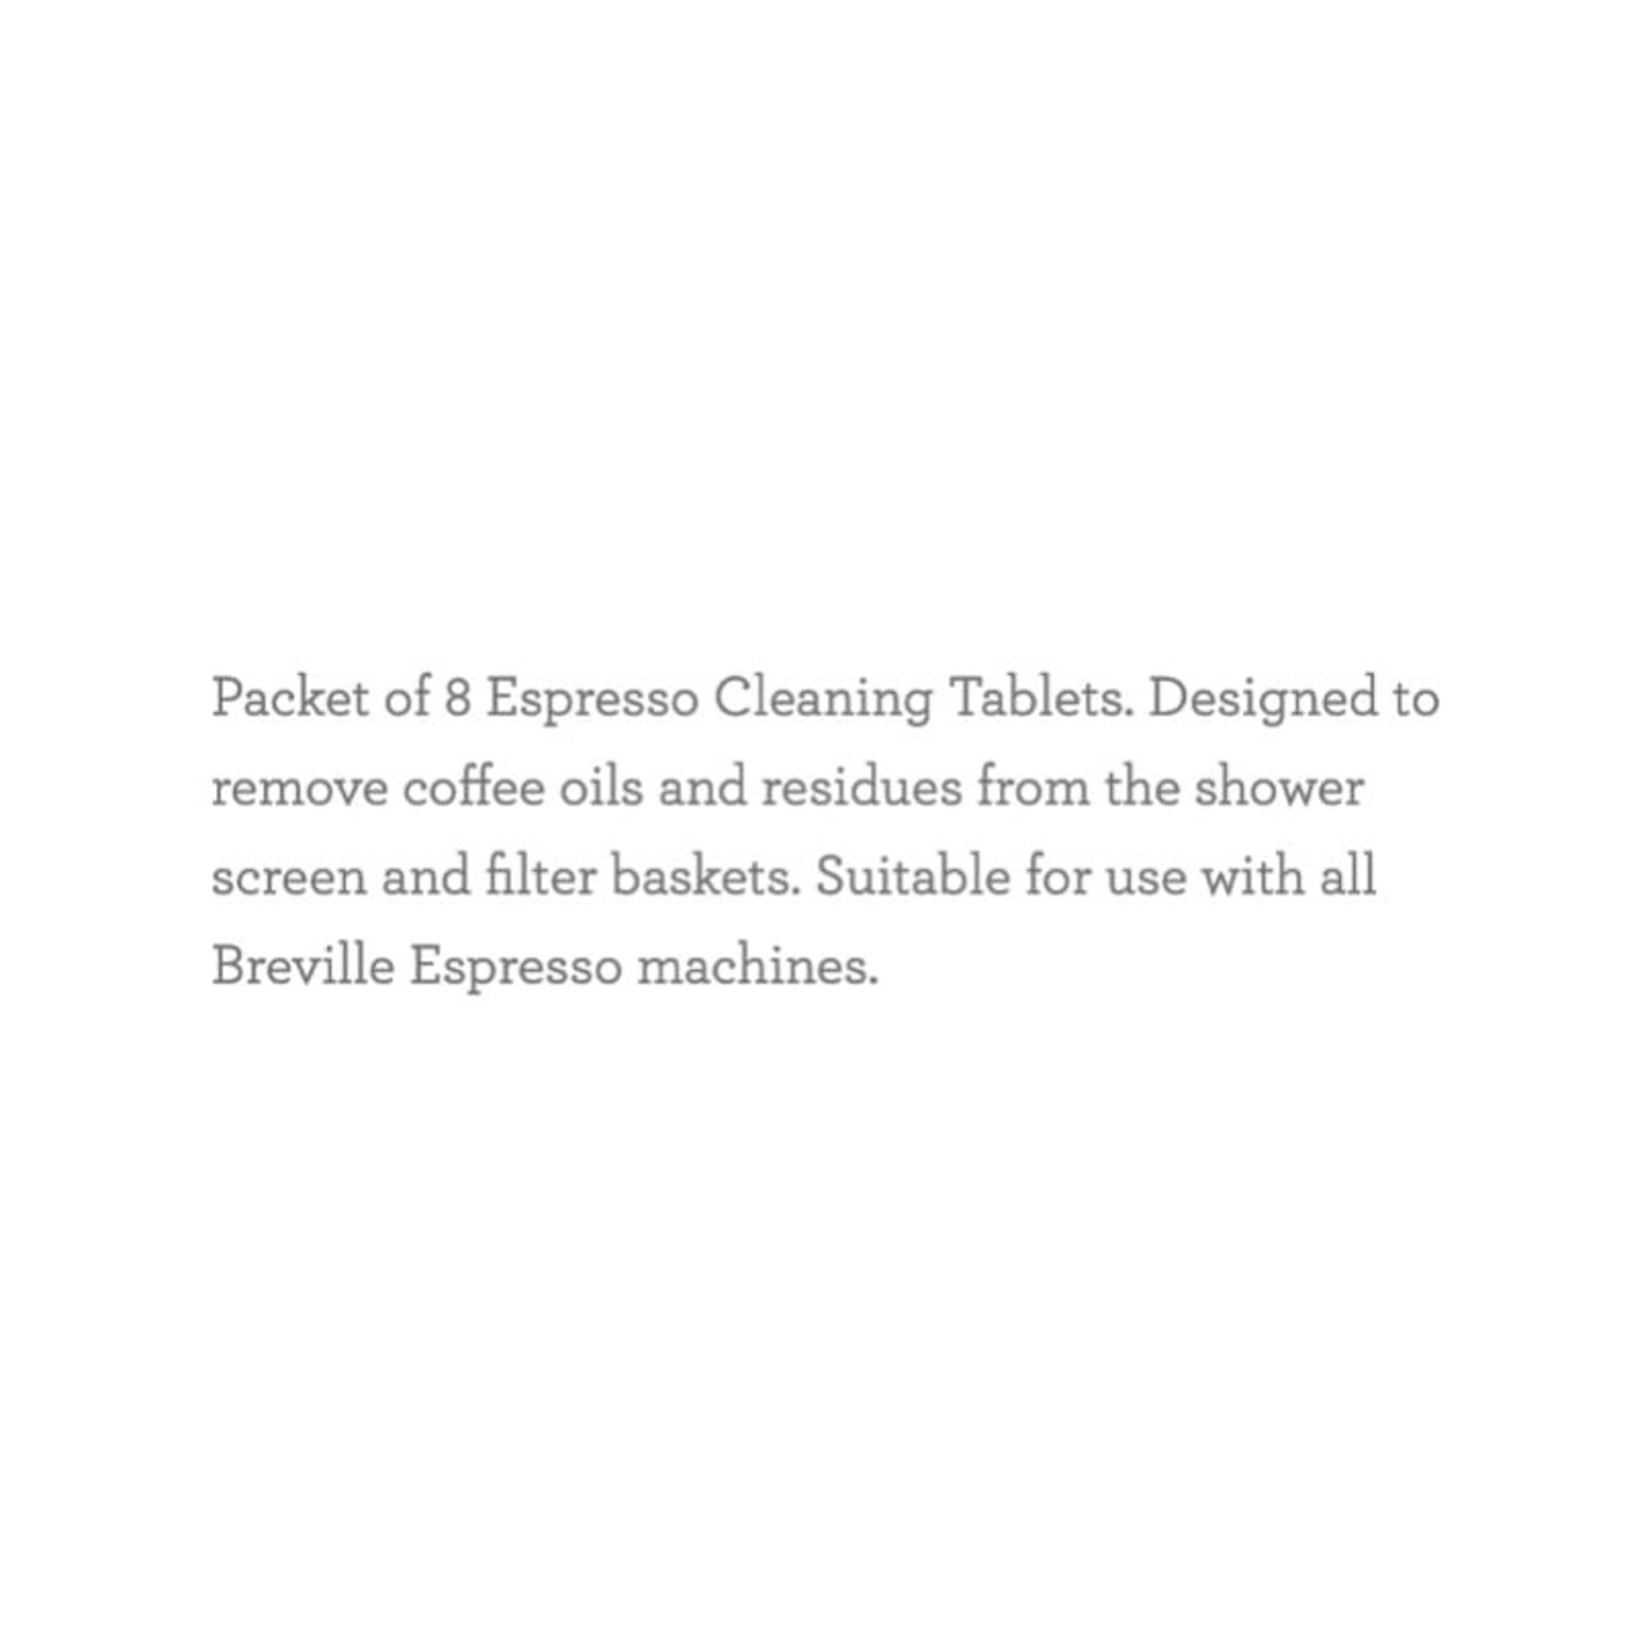 BREVILLE Espresso Cleaning Tablets (8)